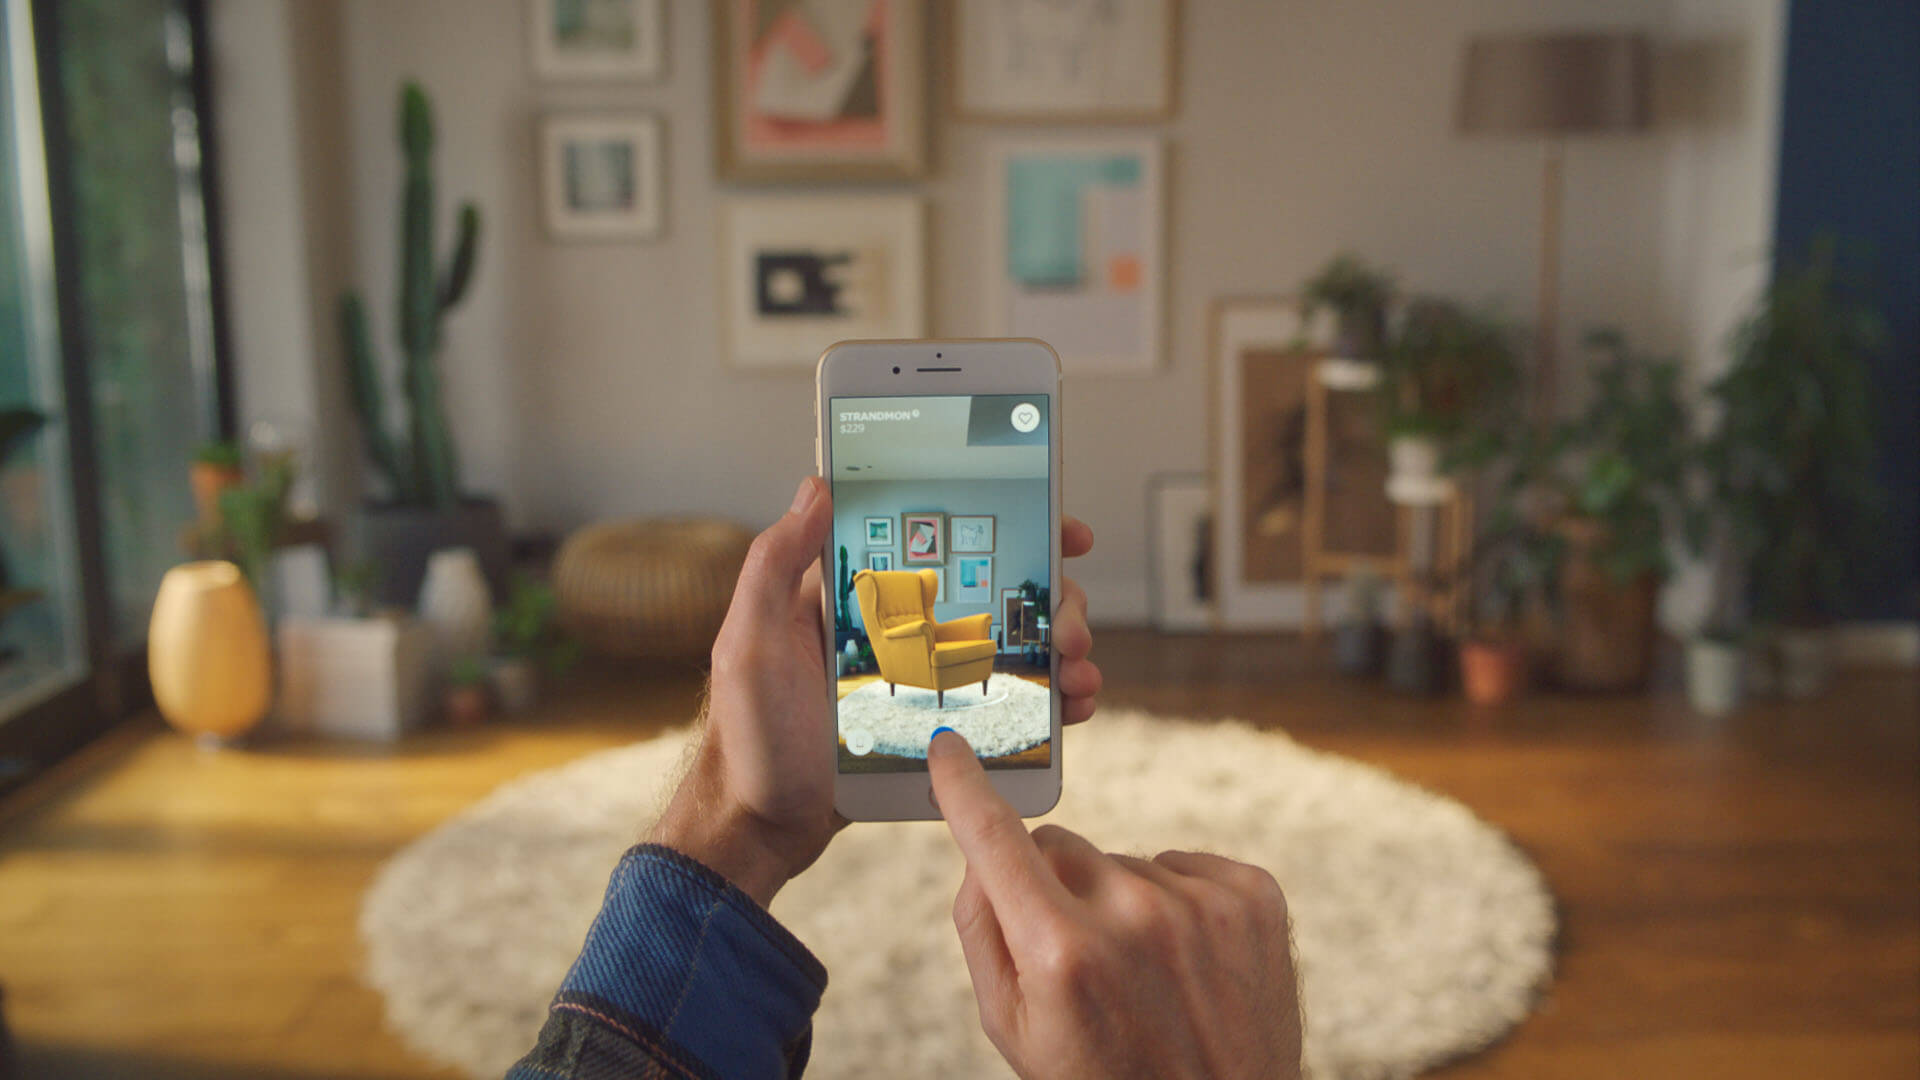 IKEA recently announced the launch of IKEA Place, an augmented reality app that lets people virtually place furniture in their home. Source: IKEA